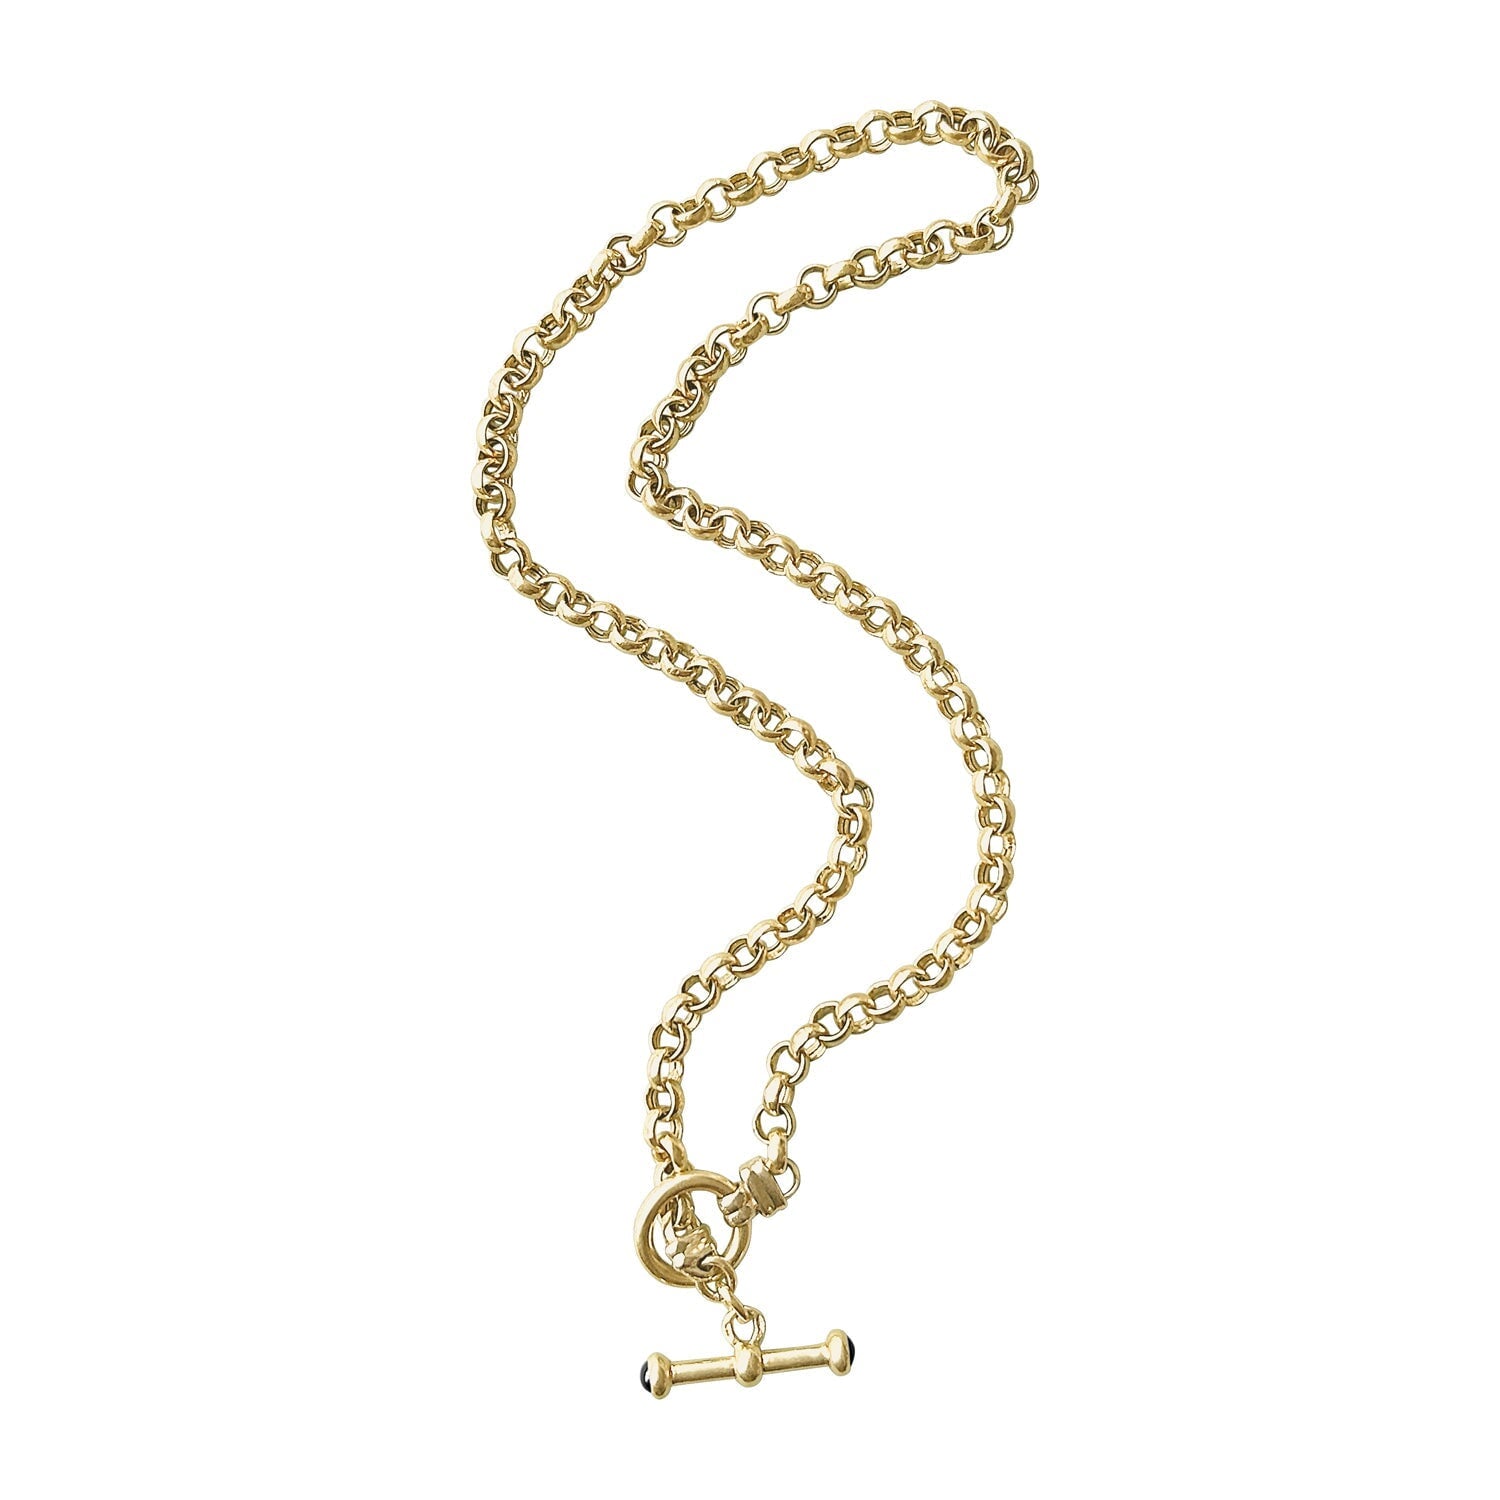 Vintage Gold Toggle Chain Necklace